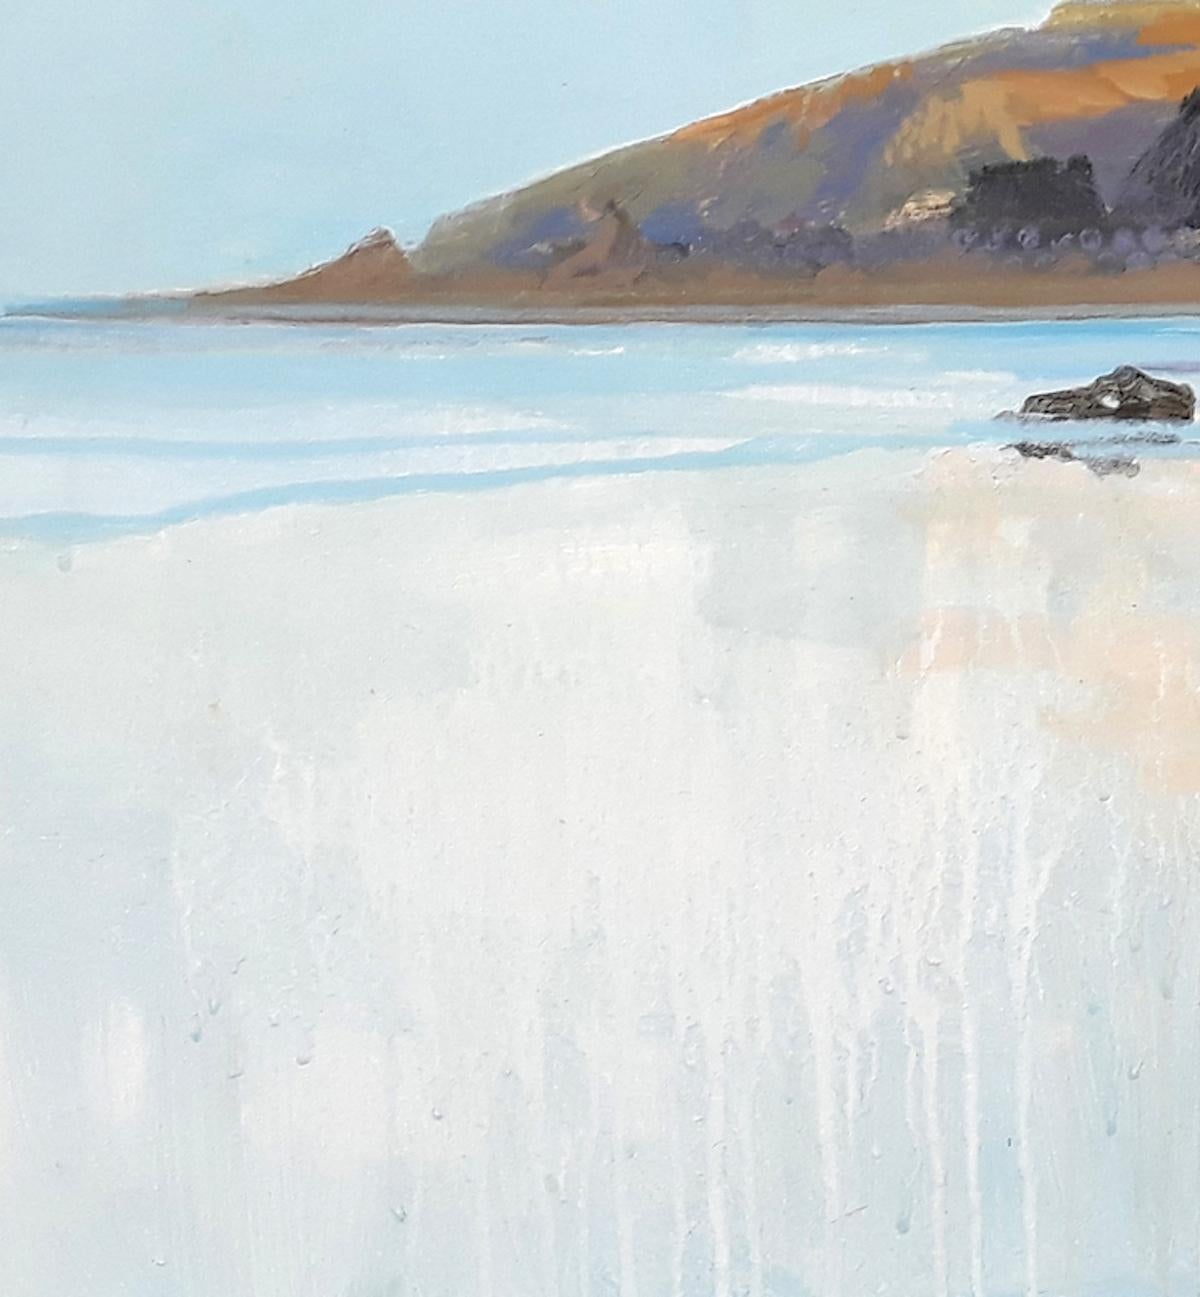 Evening Light at Sandymouth is an original contemporary seascape painting by Clark Nicol. At certain times of the year/day the tide goes out a long way and you can walk for miles. This was the case when I found this beautiful scene, where the light